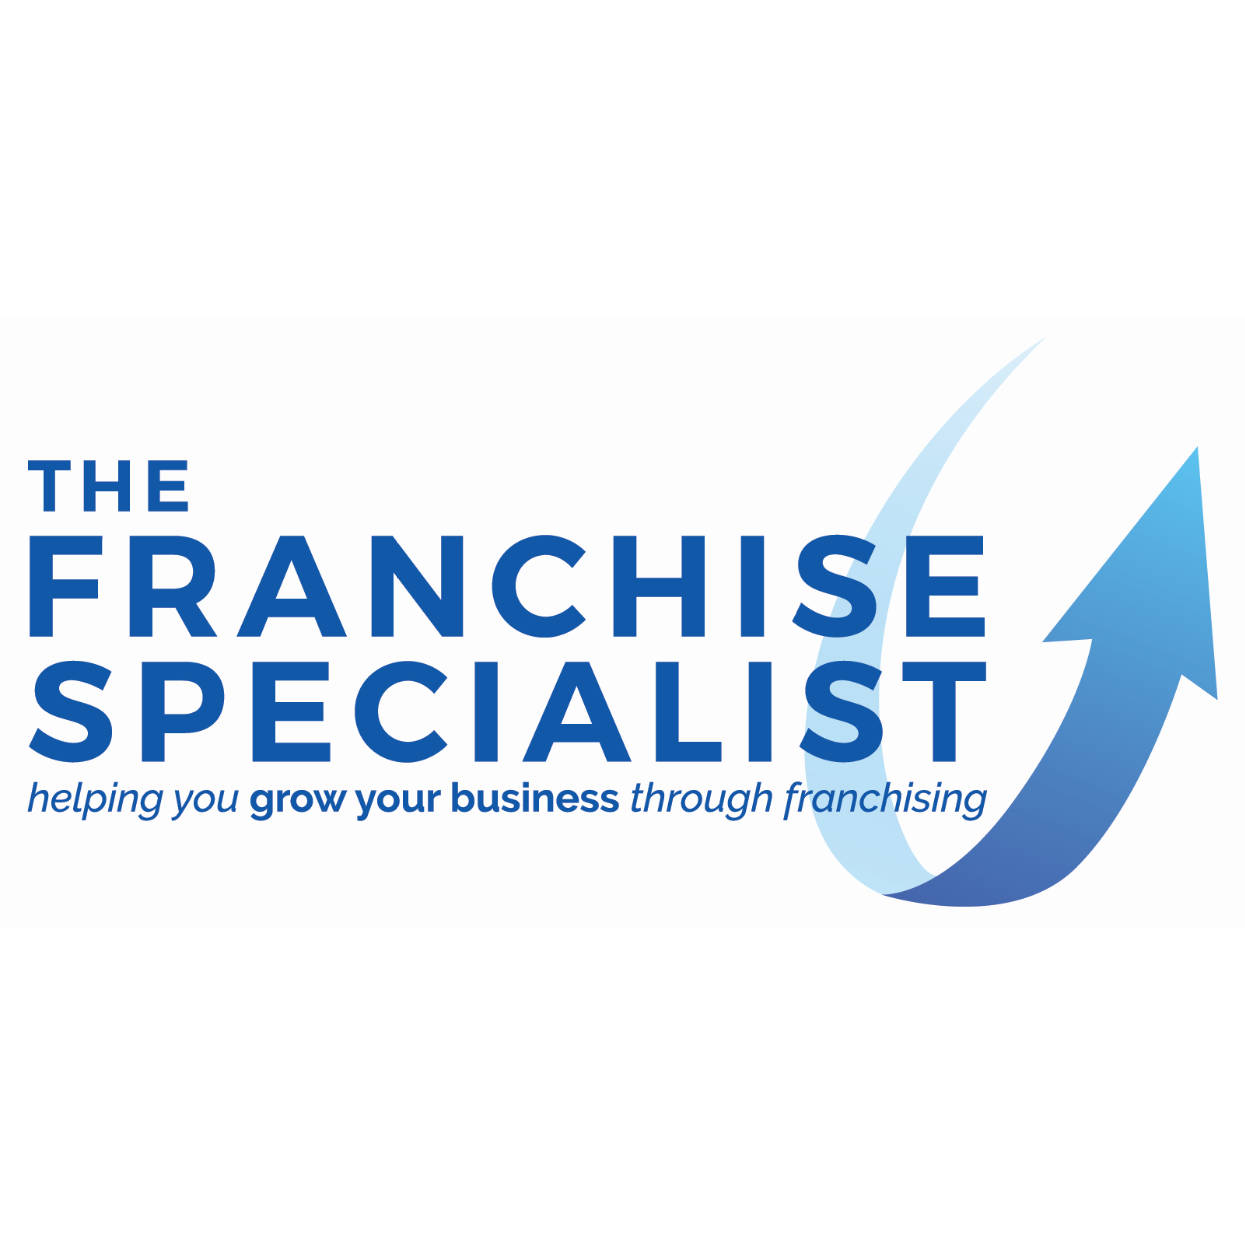 The Franchise Specialist